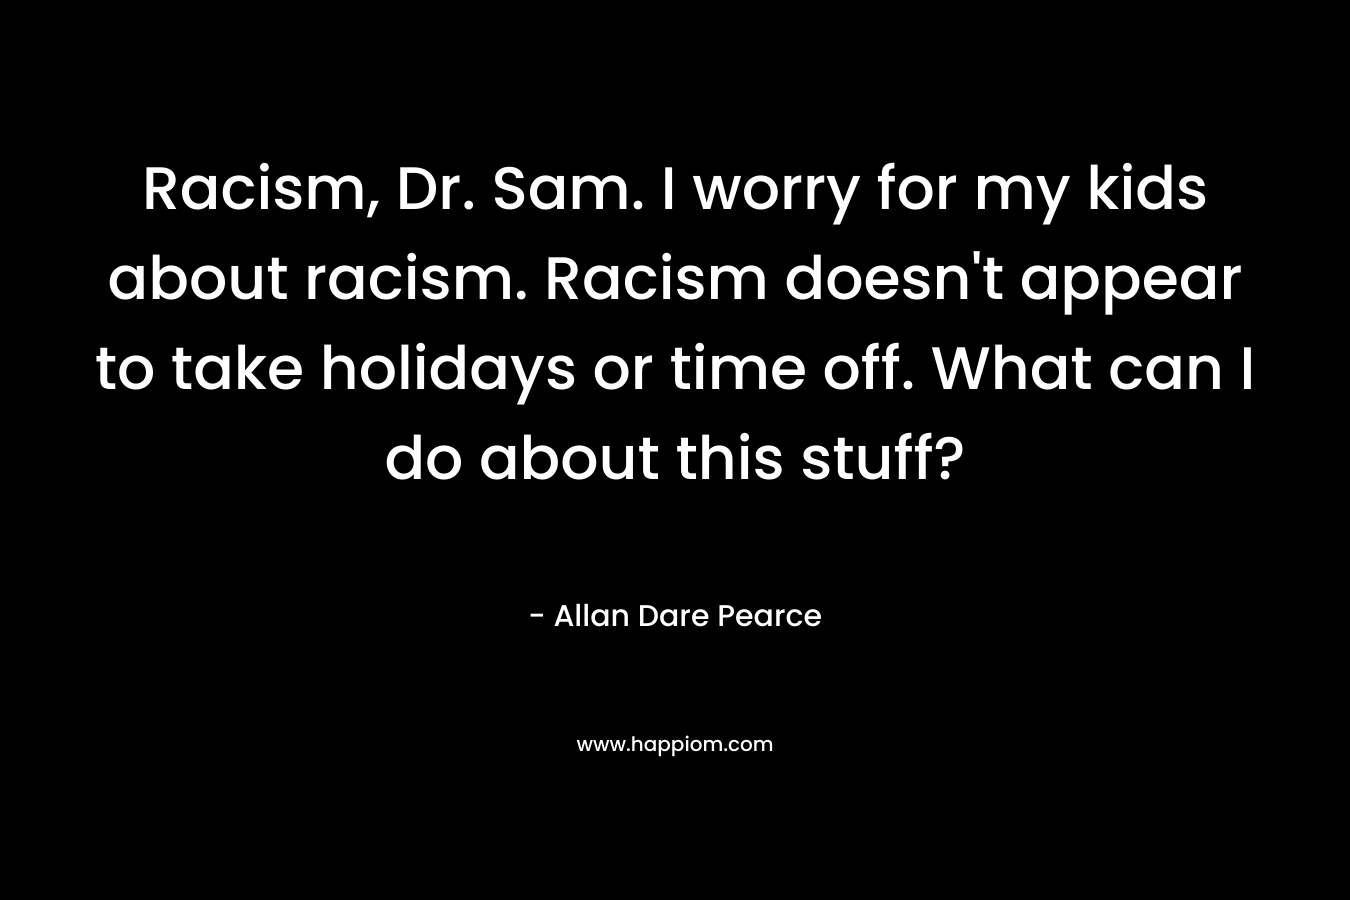 Racism, Dr. Sam. I worry for my kids about racism. Racism doesn’t appear to take holidays or time off. What can I do about this stuff? – Allan Dare Pearce